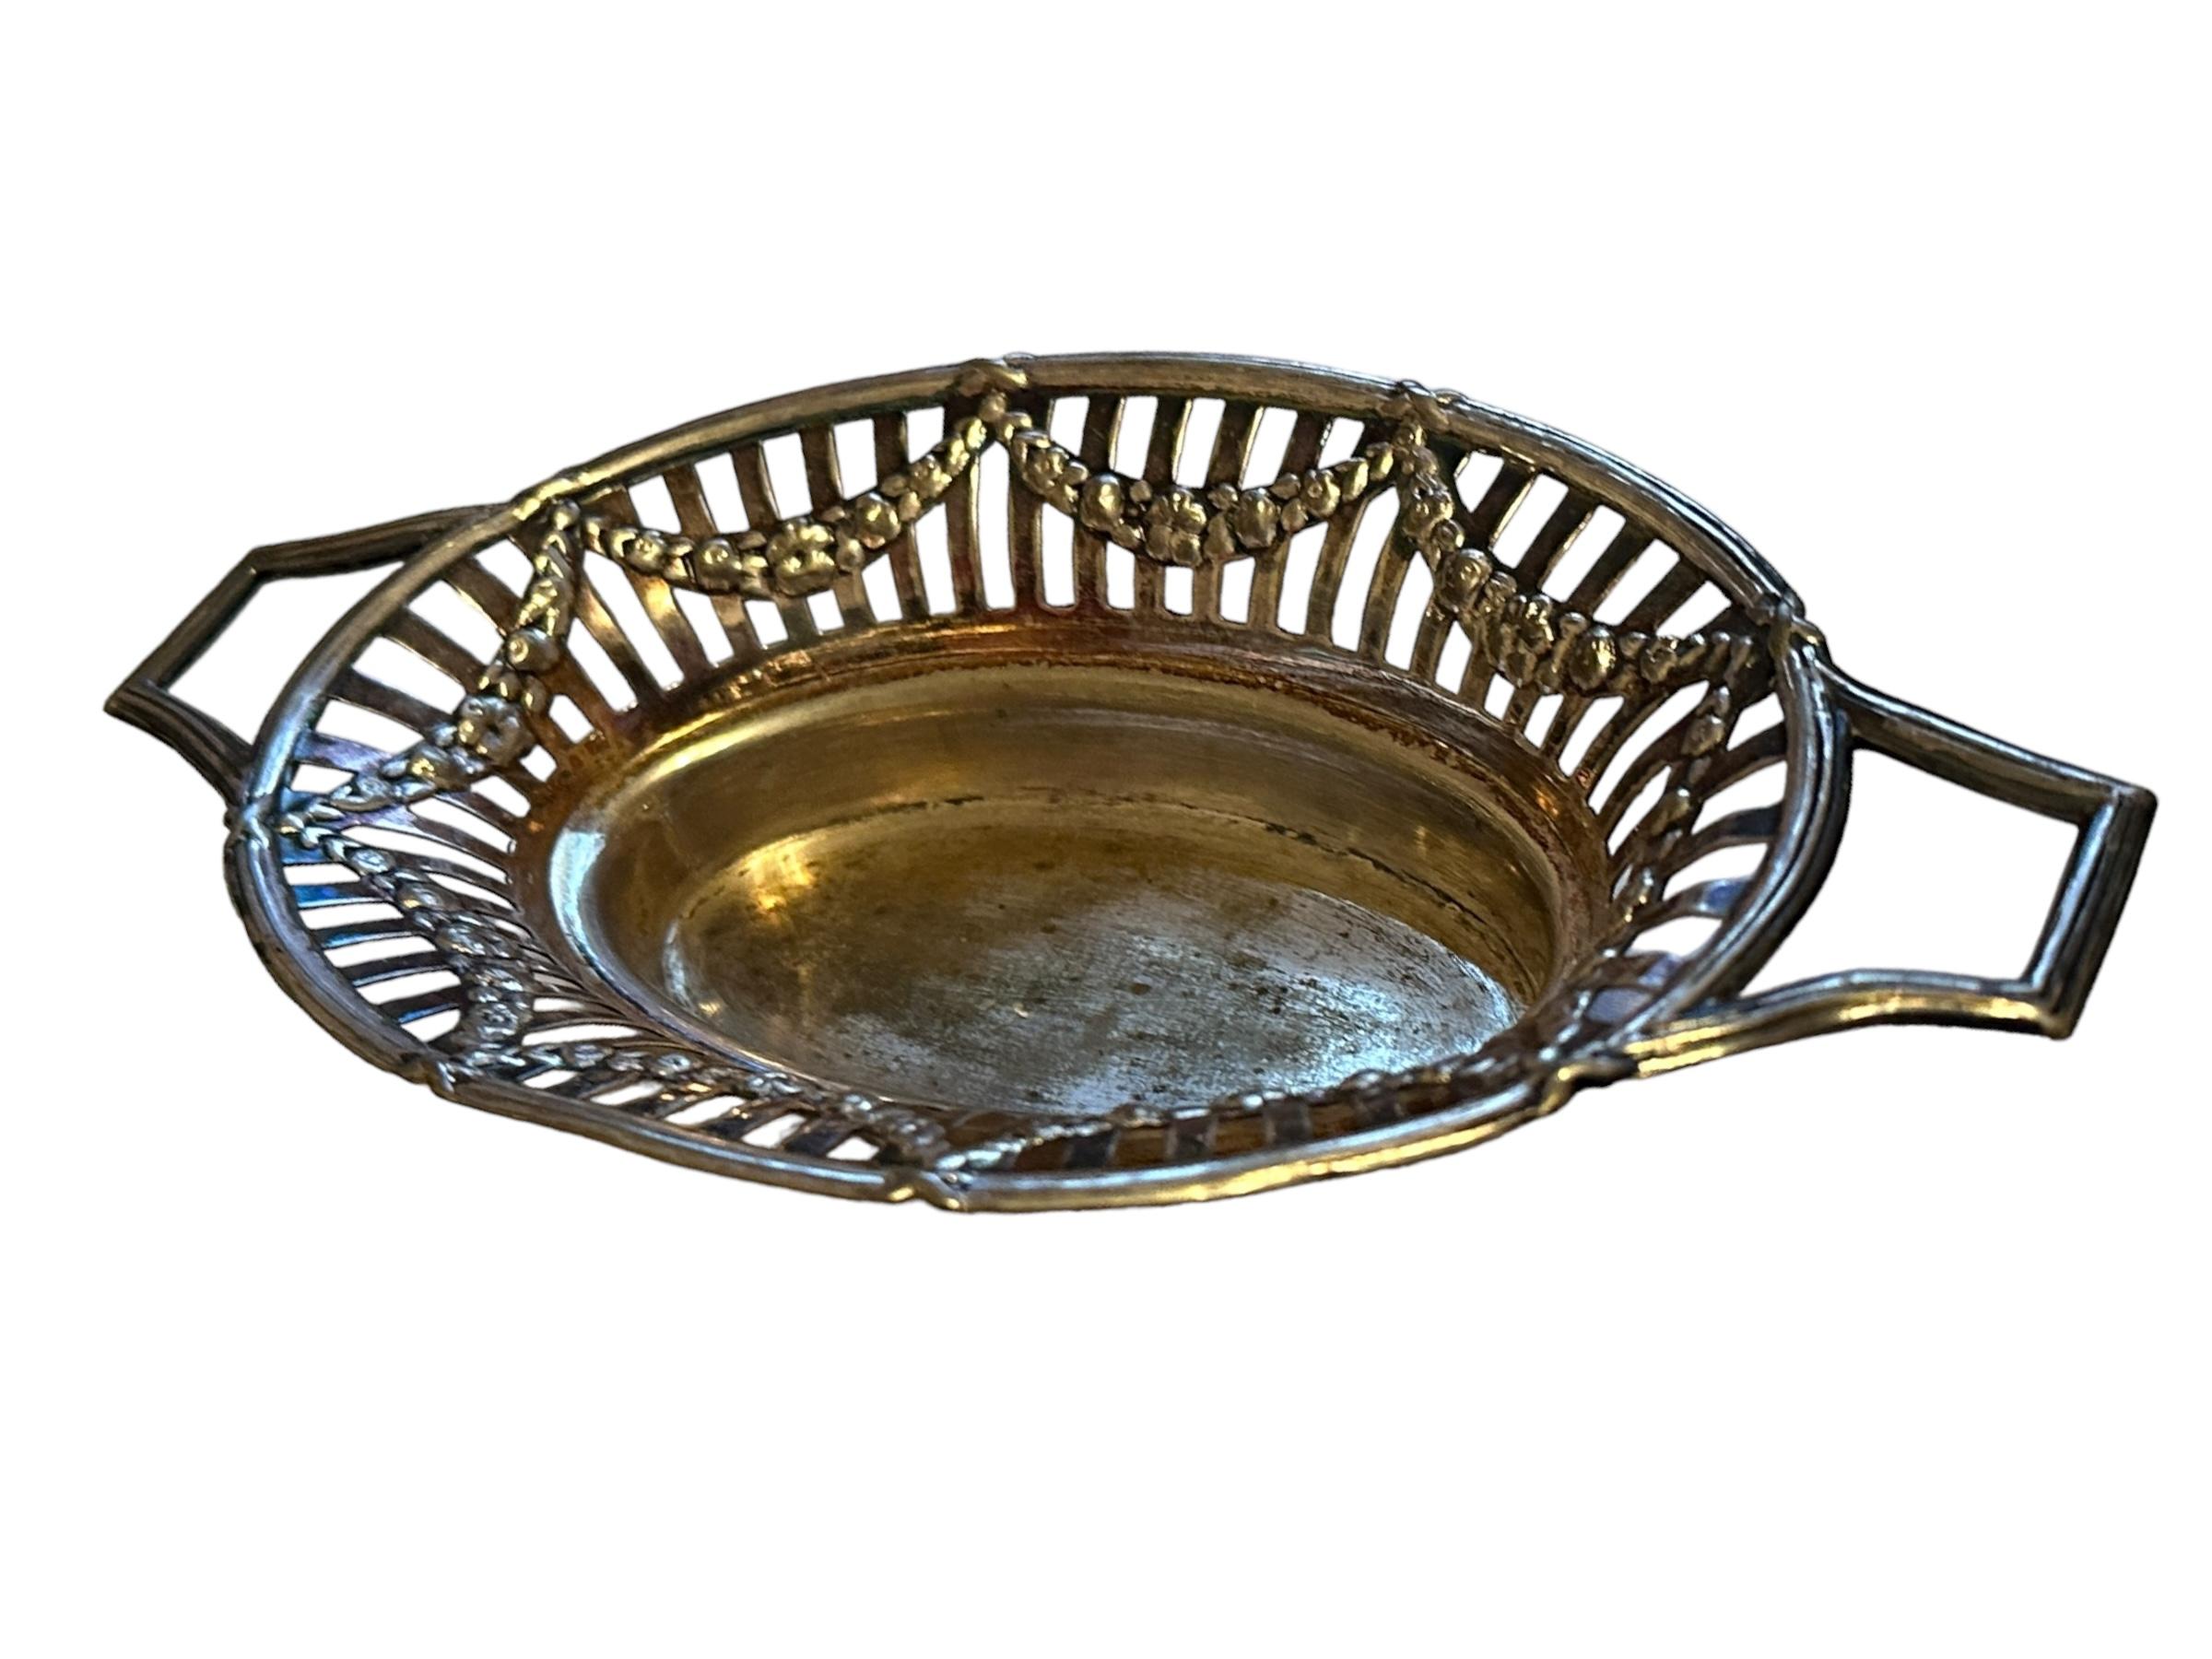 Art Nouveau Vintage Silver Plate Candy Dish Basket Tray, 1910s, Germany or Austria For Sale